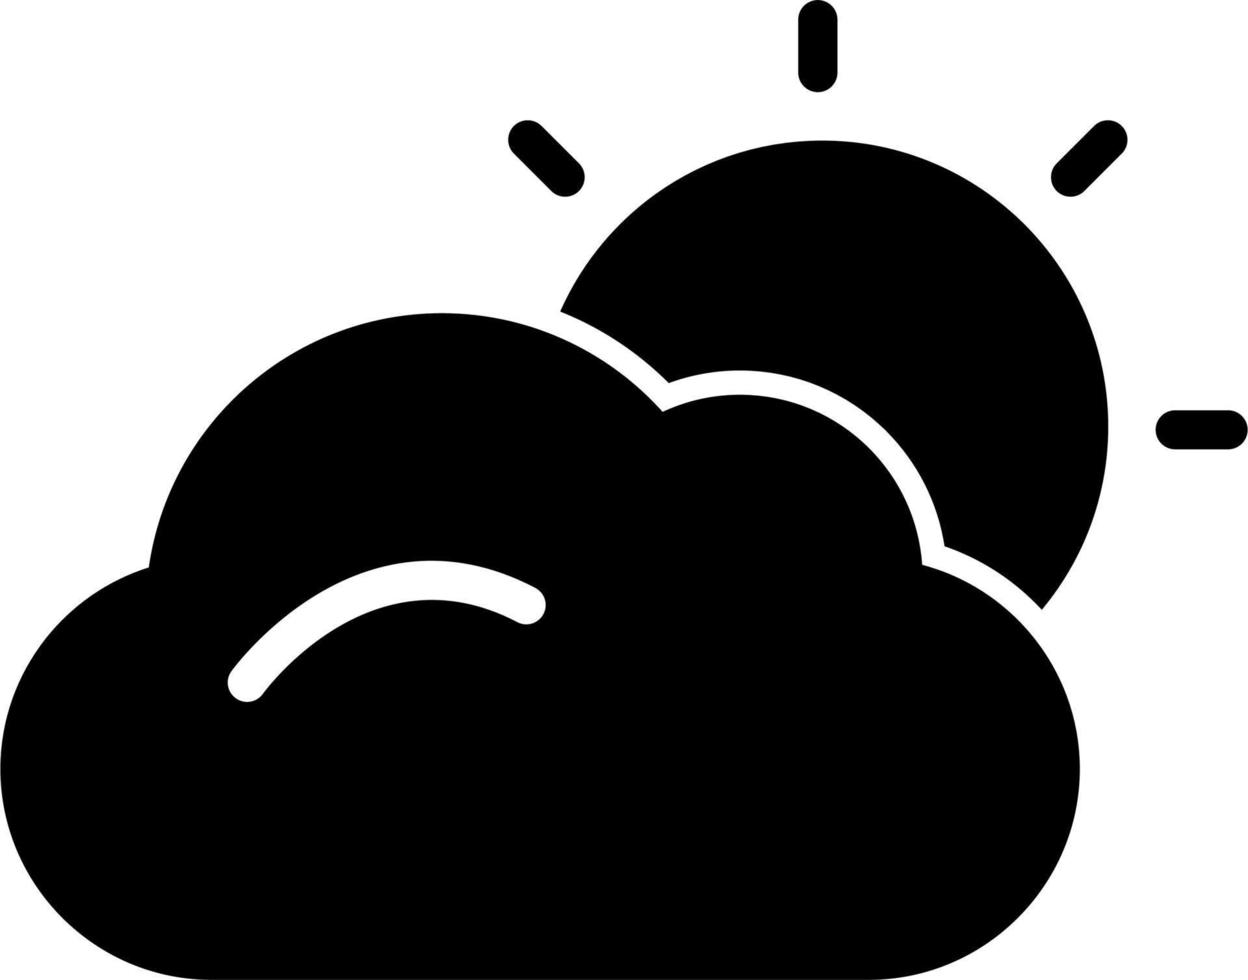 Clouds And Sun Vector Icon